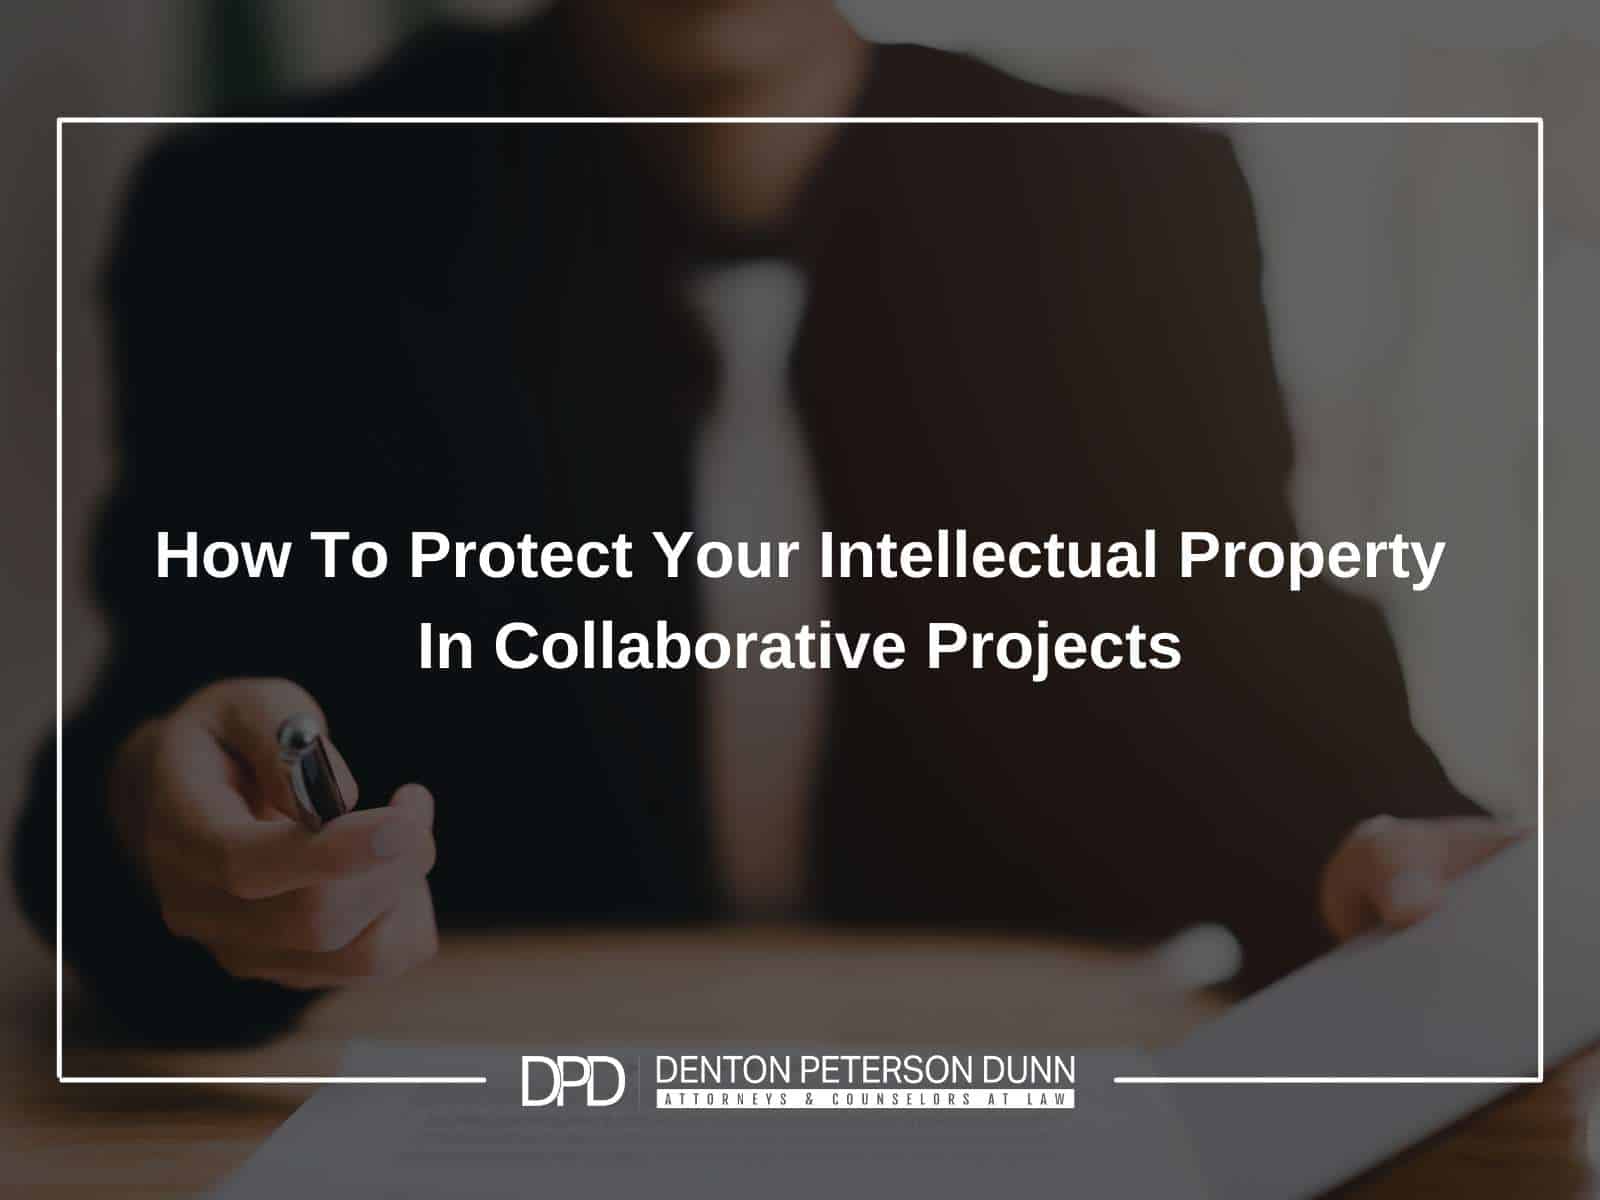 How To Protect Your Intellectual Property In Collaborative Projects